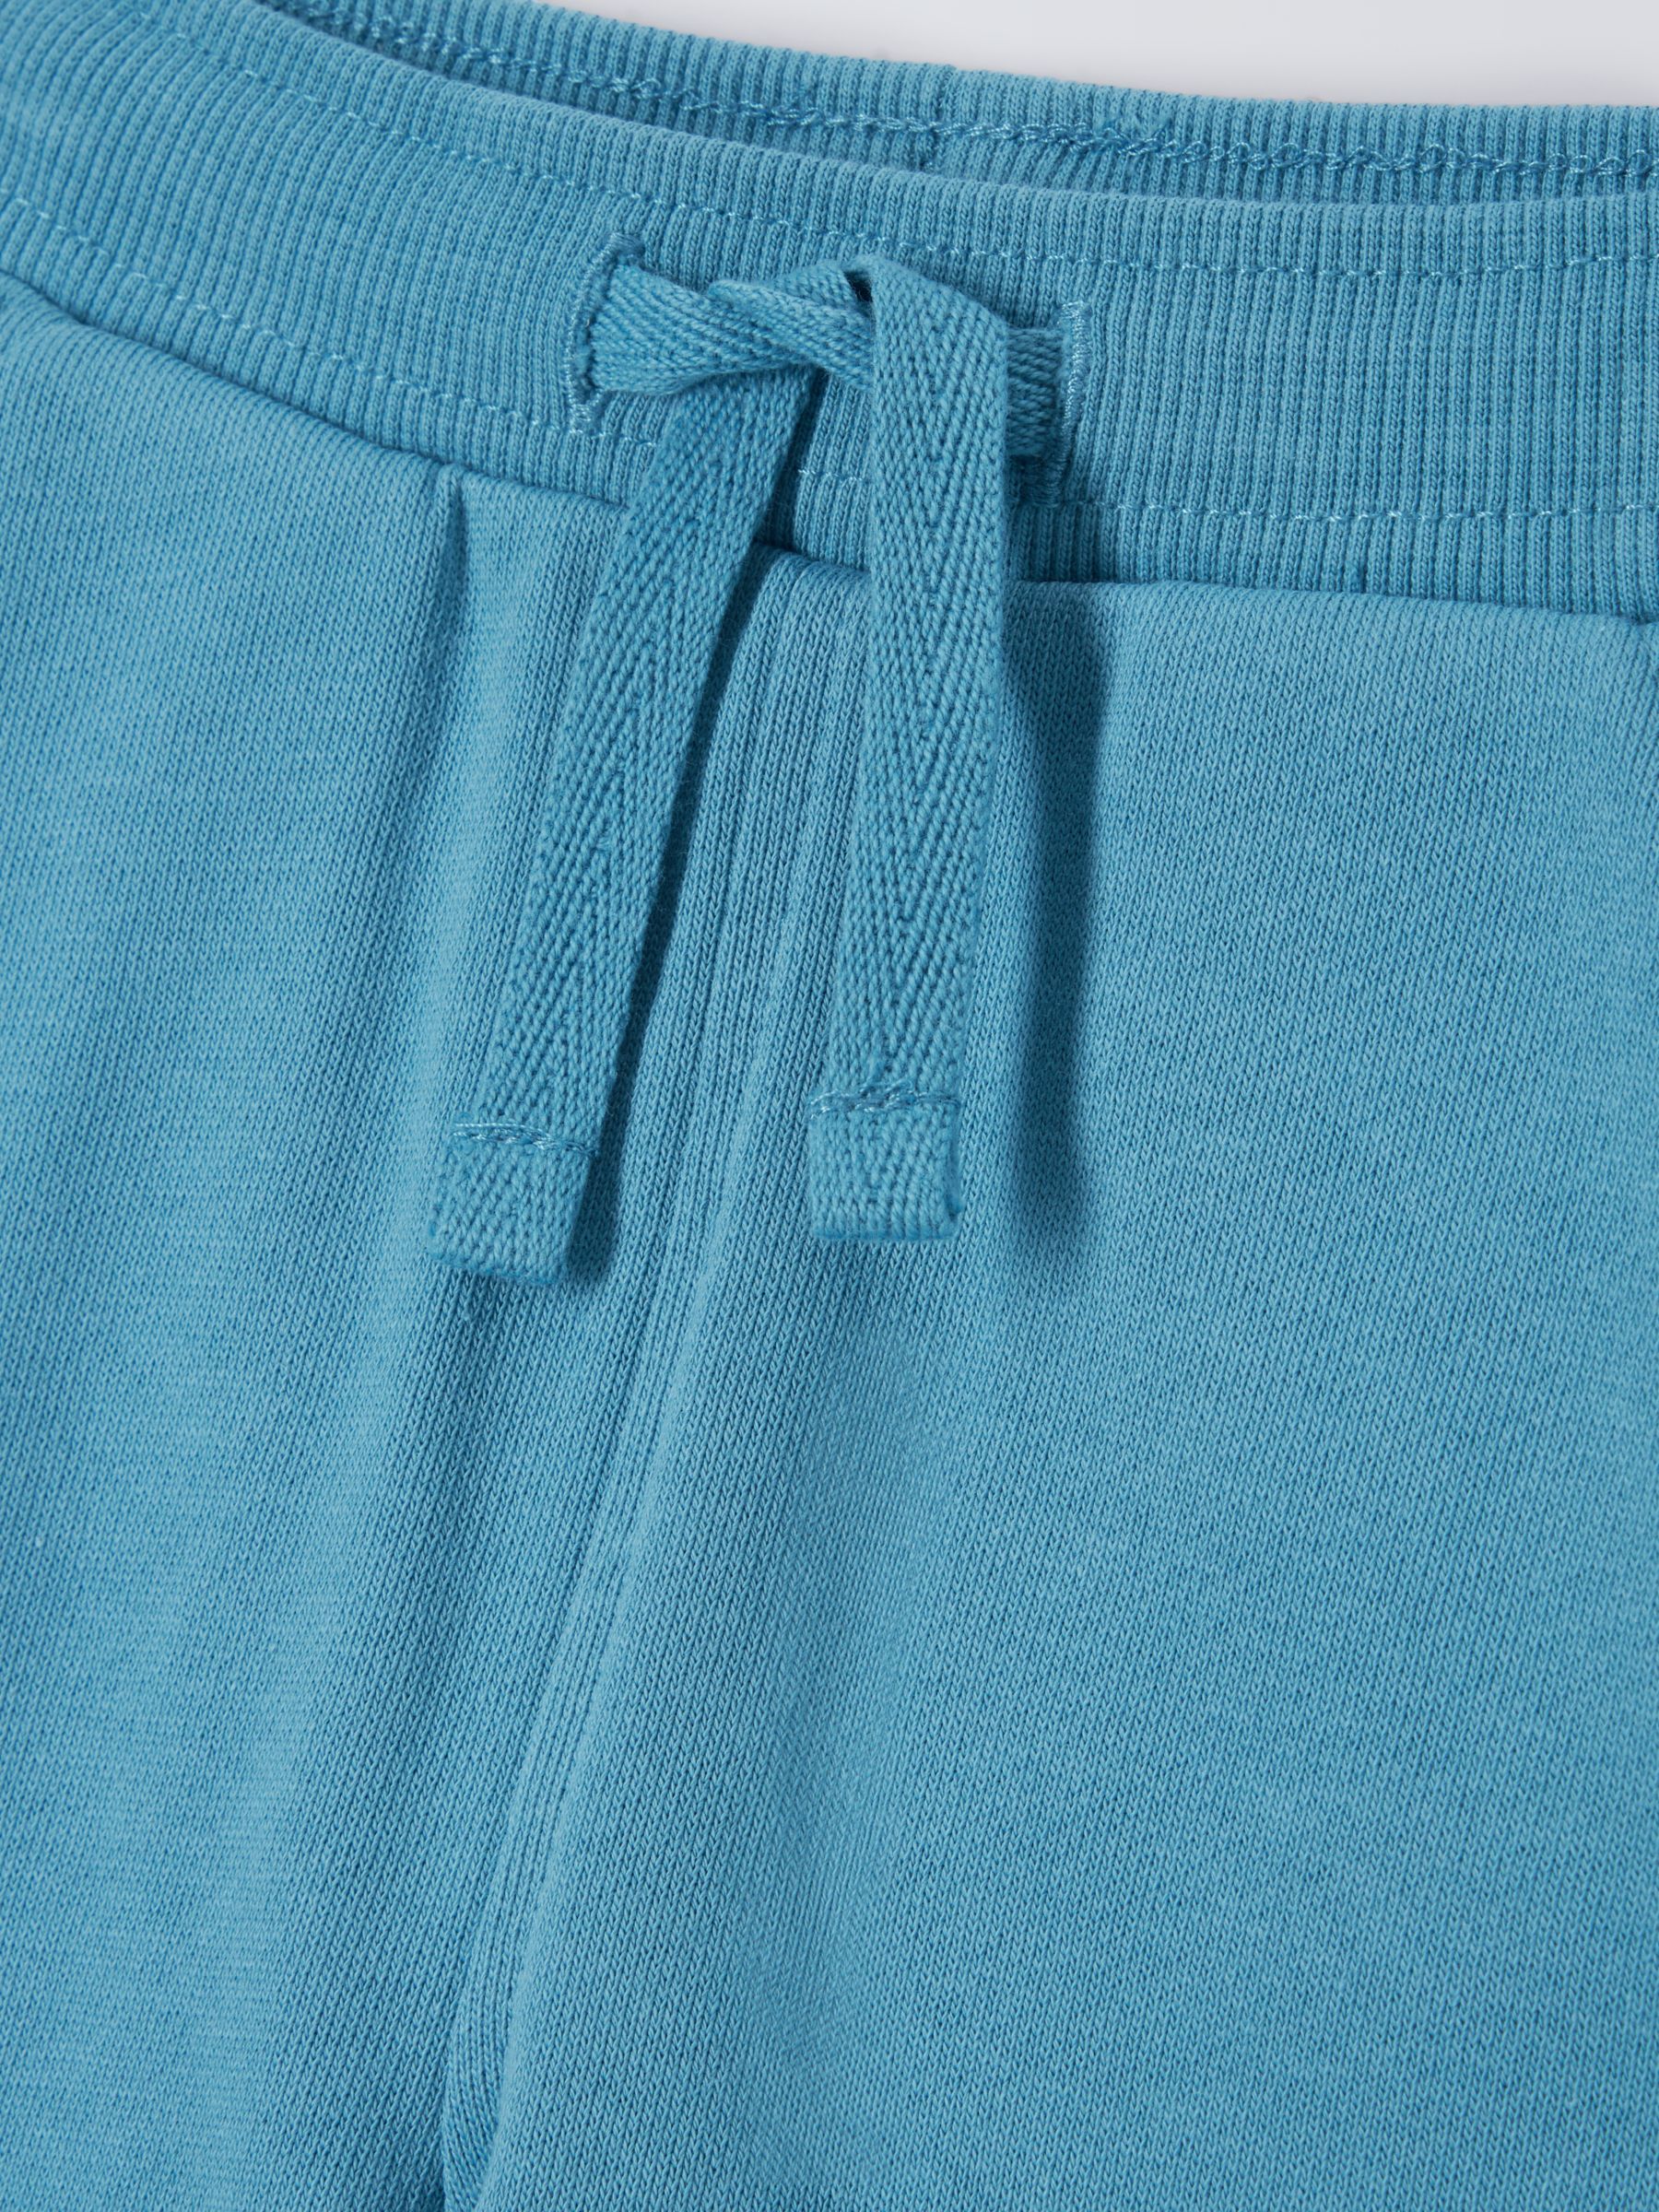 John Lewis ANYDAY Baby Cotton Joggers, Blue at John Lewis & Partners